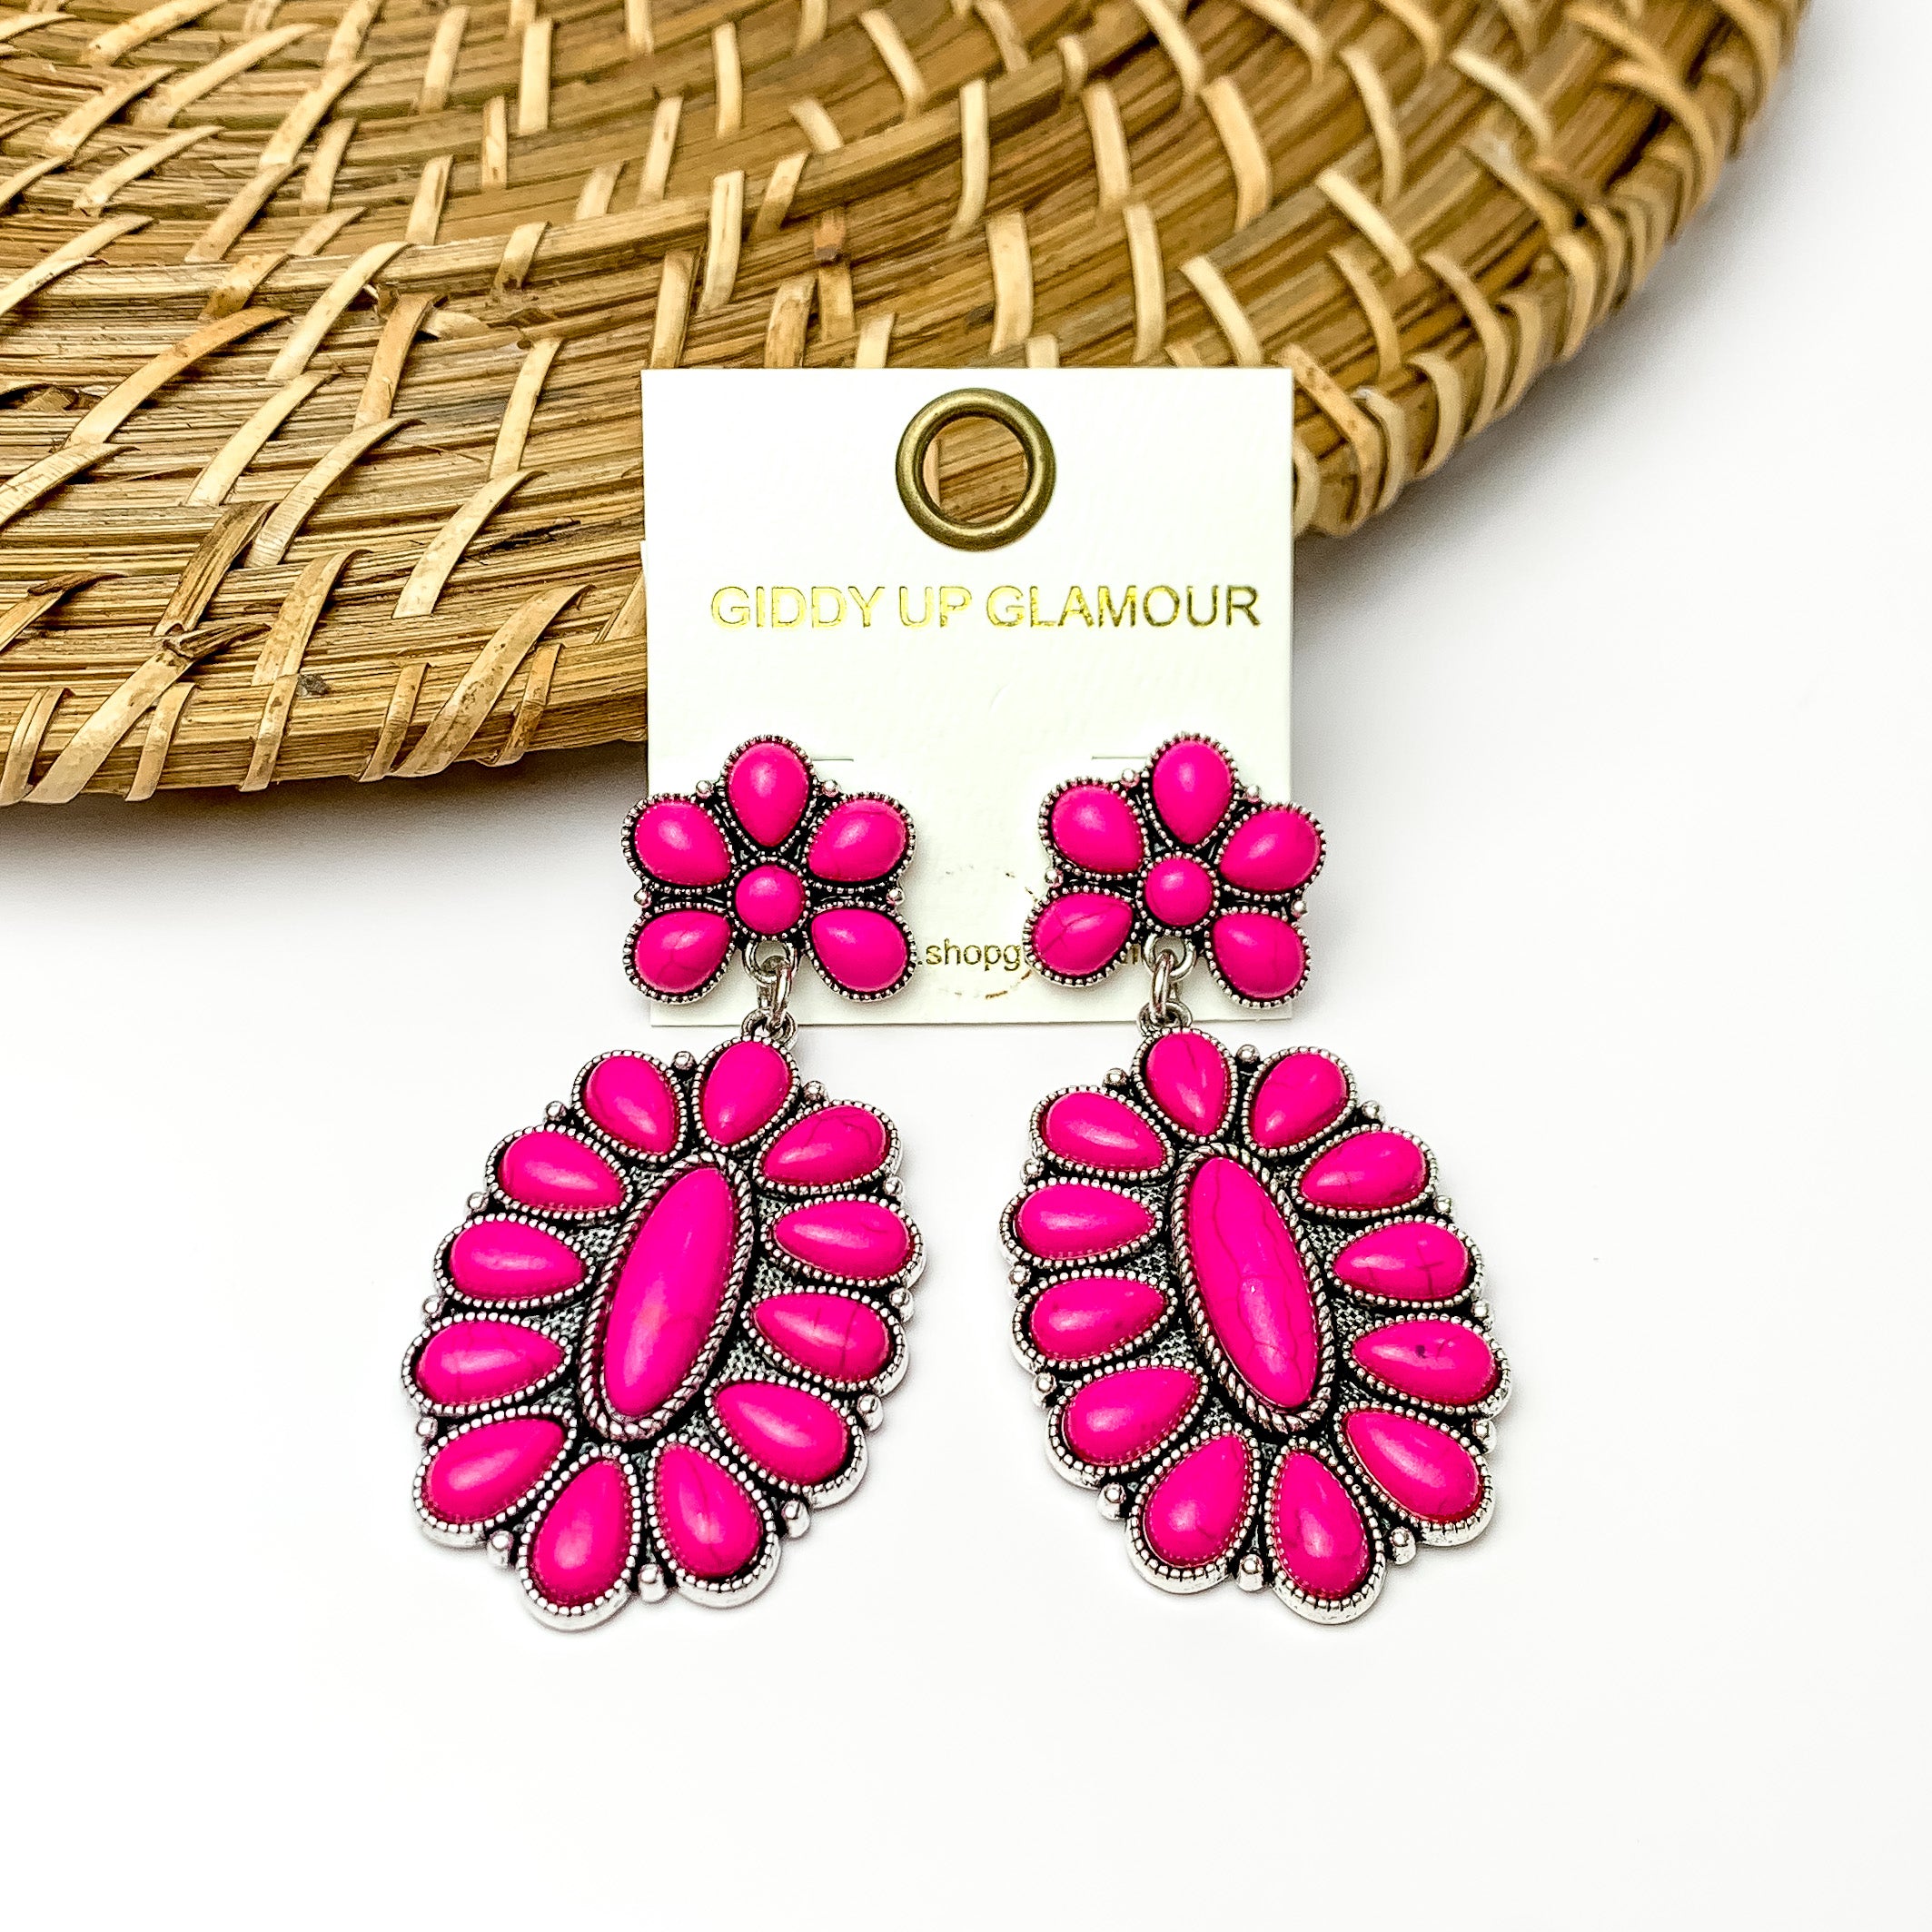 Hot Pink Stone Oval Flower Earrings - Giddy Up Glamour Boutique